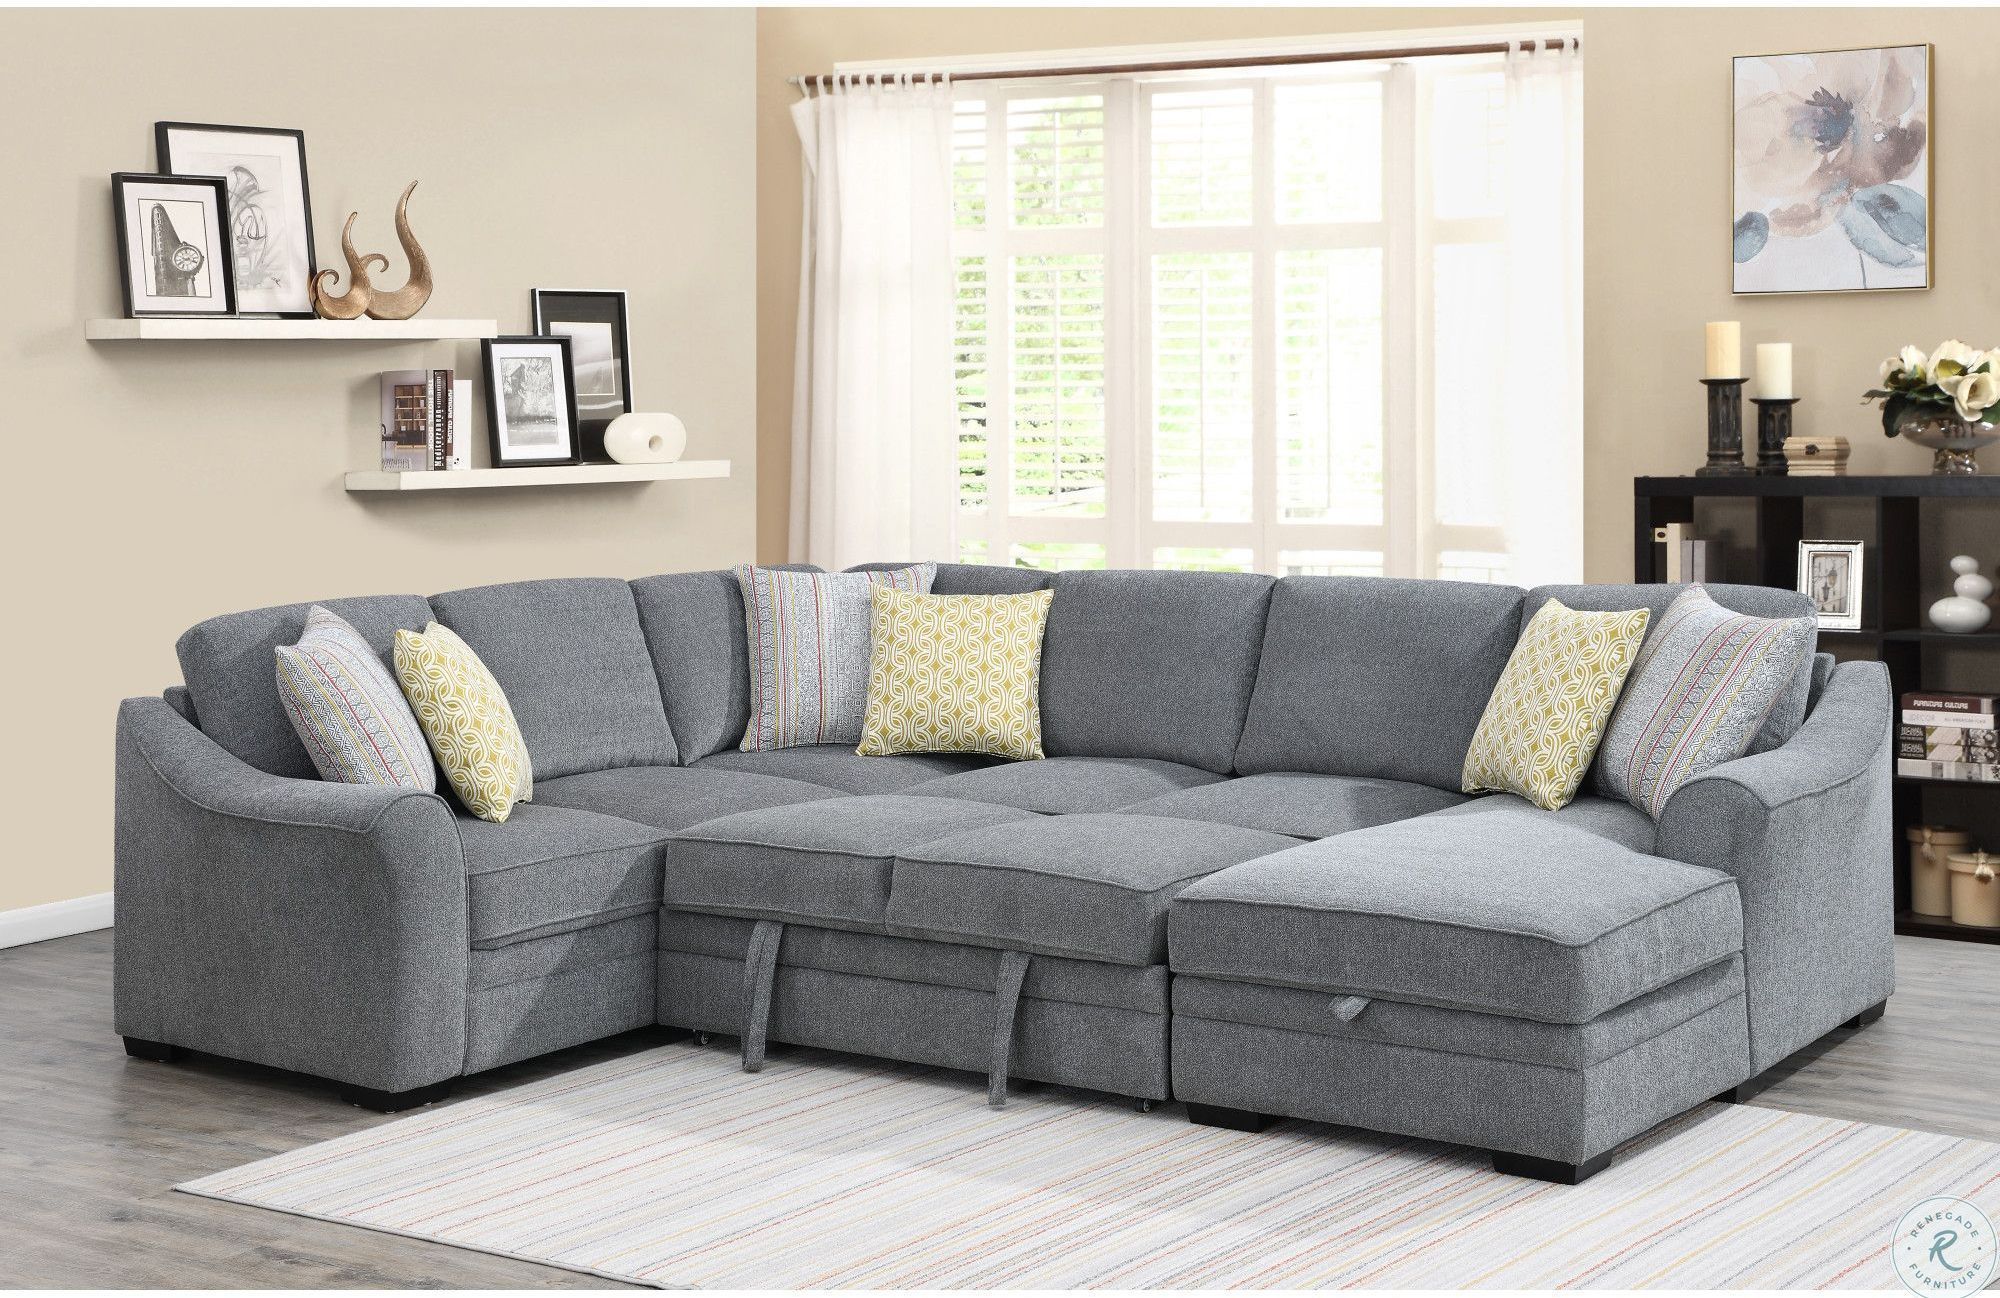 Accrington Earth Laf Sectional | Sectional Sleeper Sofa, Furniture Within Left Or Right Facing Sleeper Sectionals (View 2 of 21)